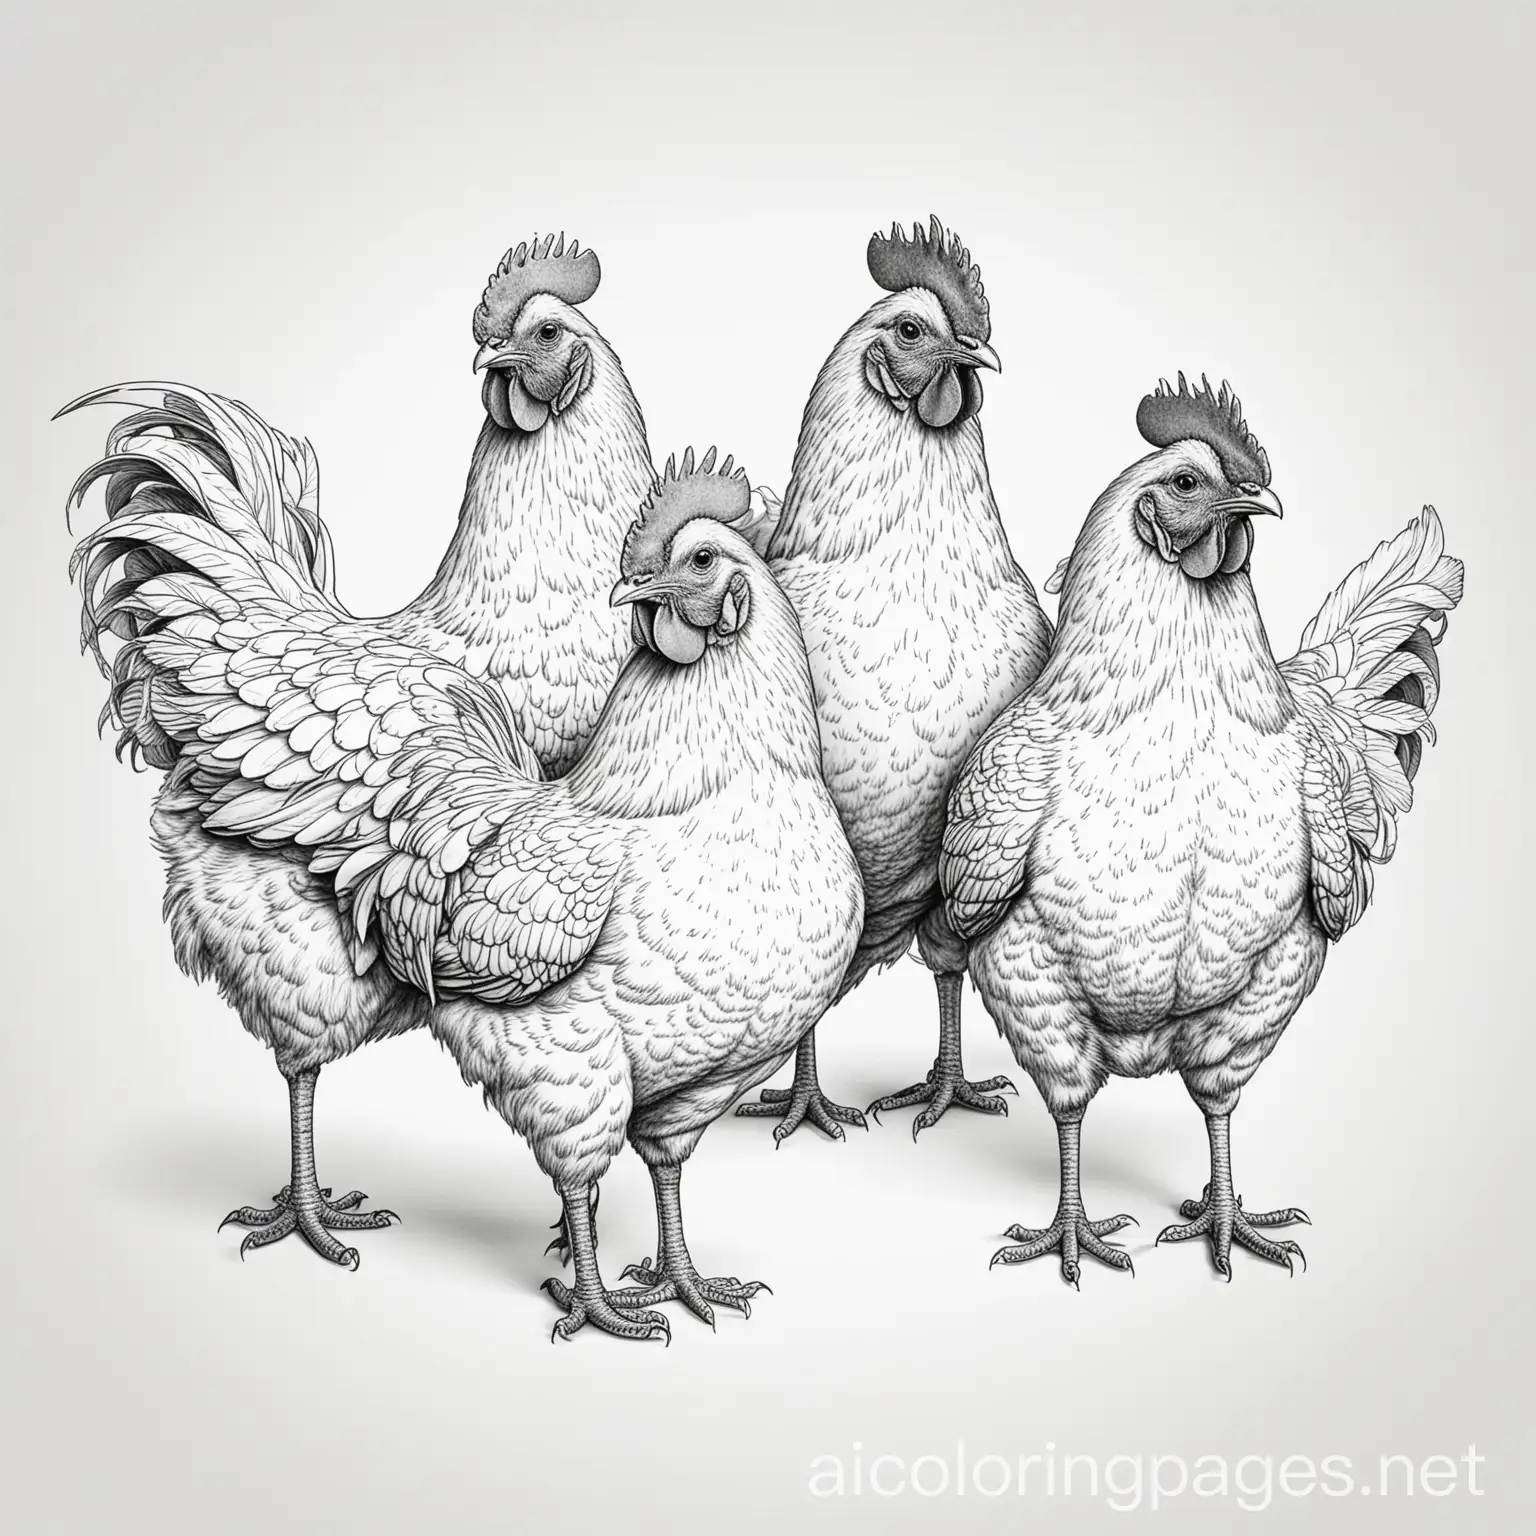 chickens, Coloring Page, black and white, line art, white background, Simplicity, Ample White Space. The background of the coloring page is plain white to make it easy for young children to color within the lines. The outlines of all the subjects are easy to distinguish, making it simple for kids to color without too much difficulty